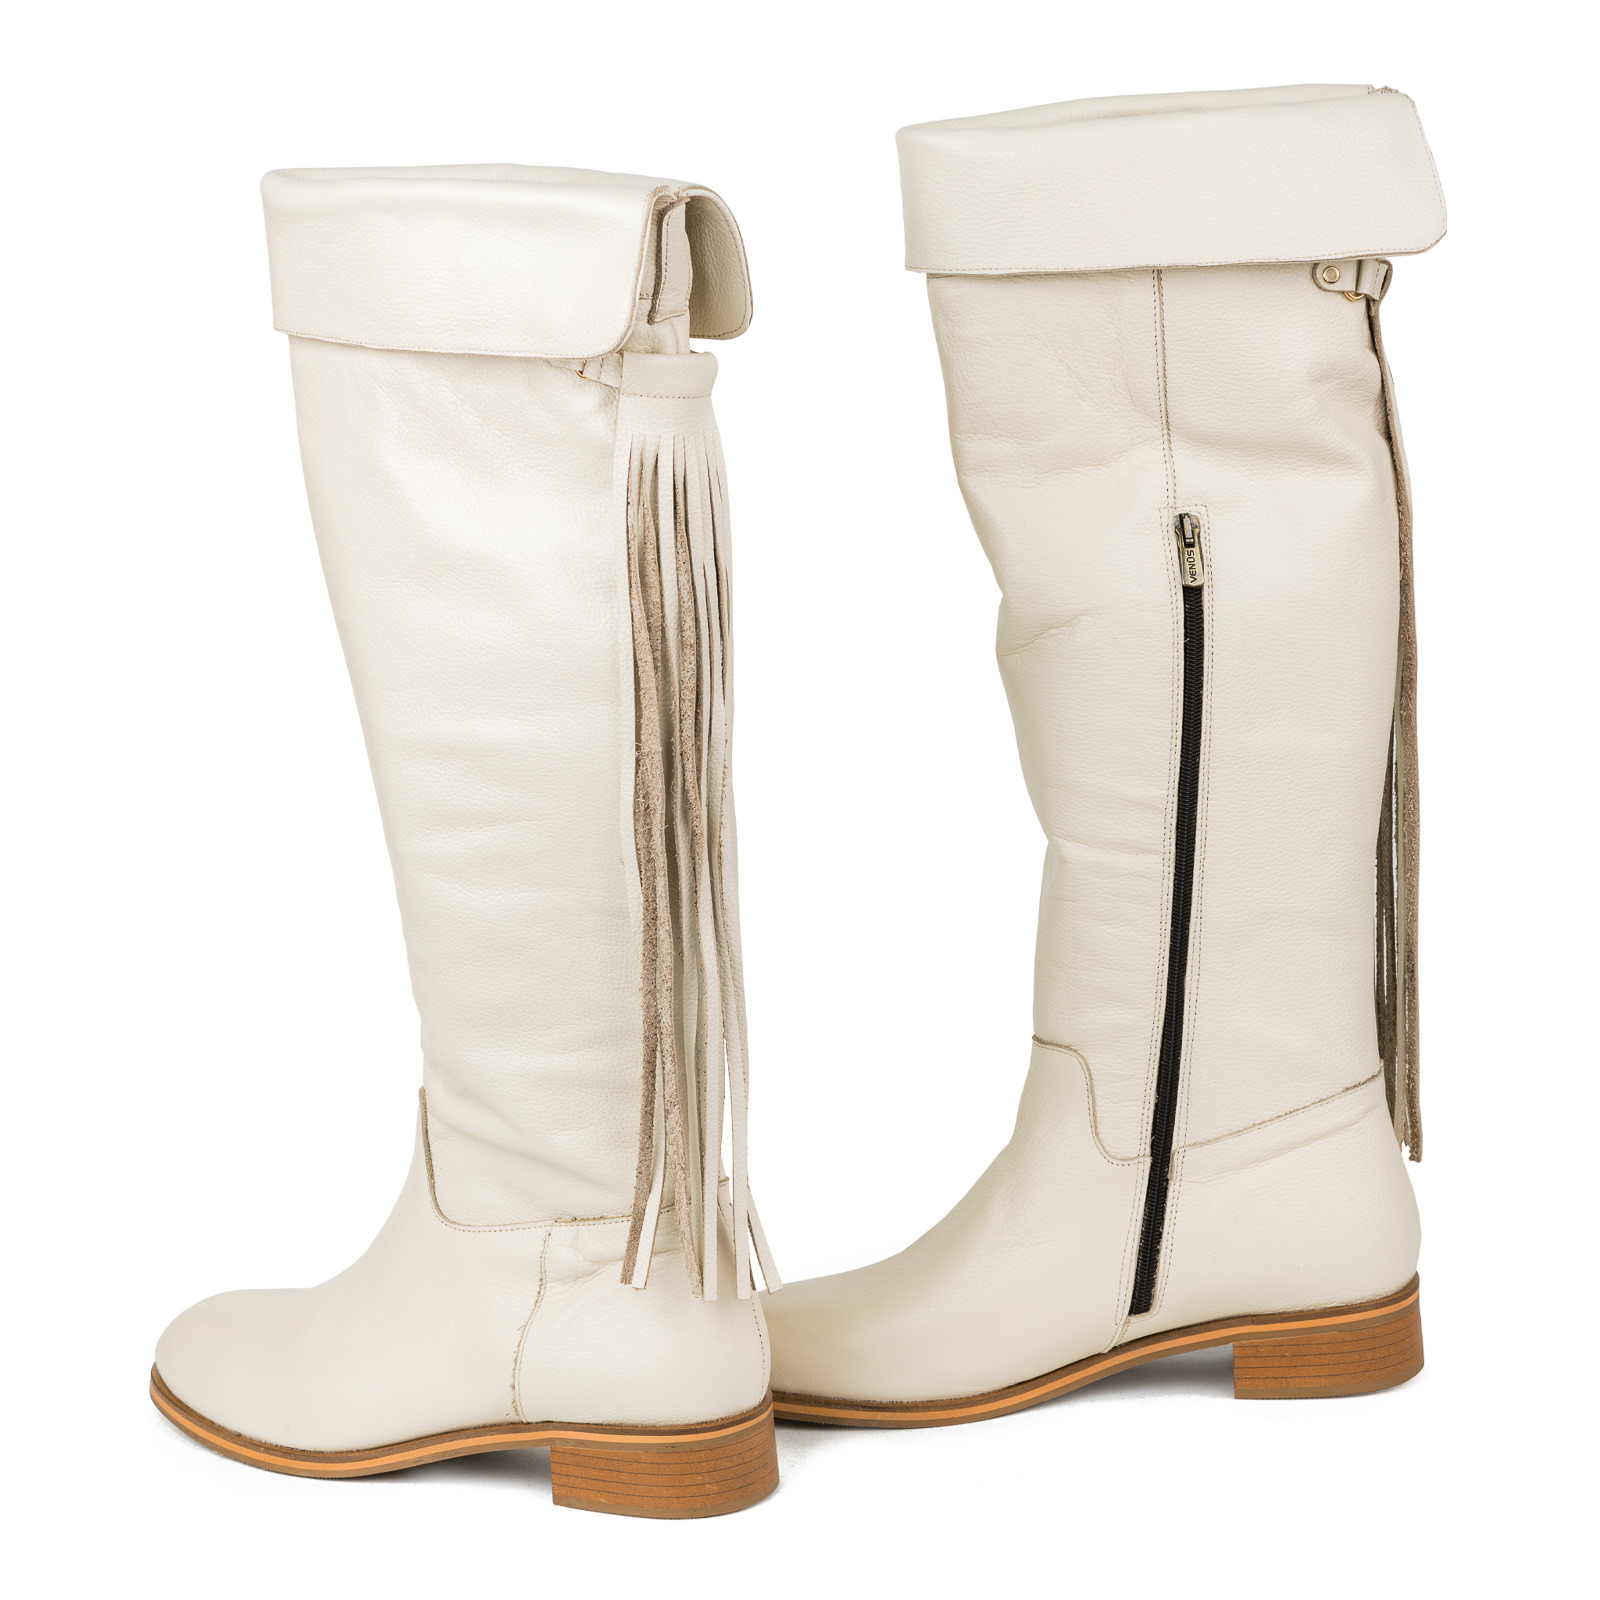 Leather boots B446 - BEIGE